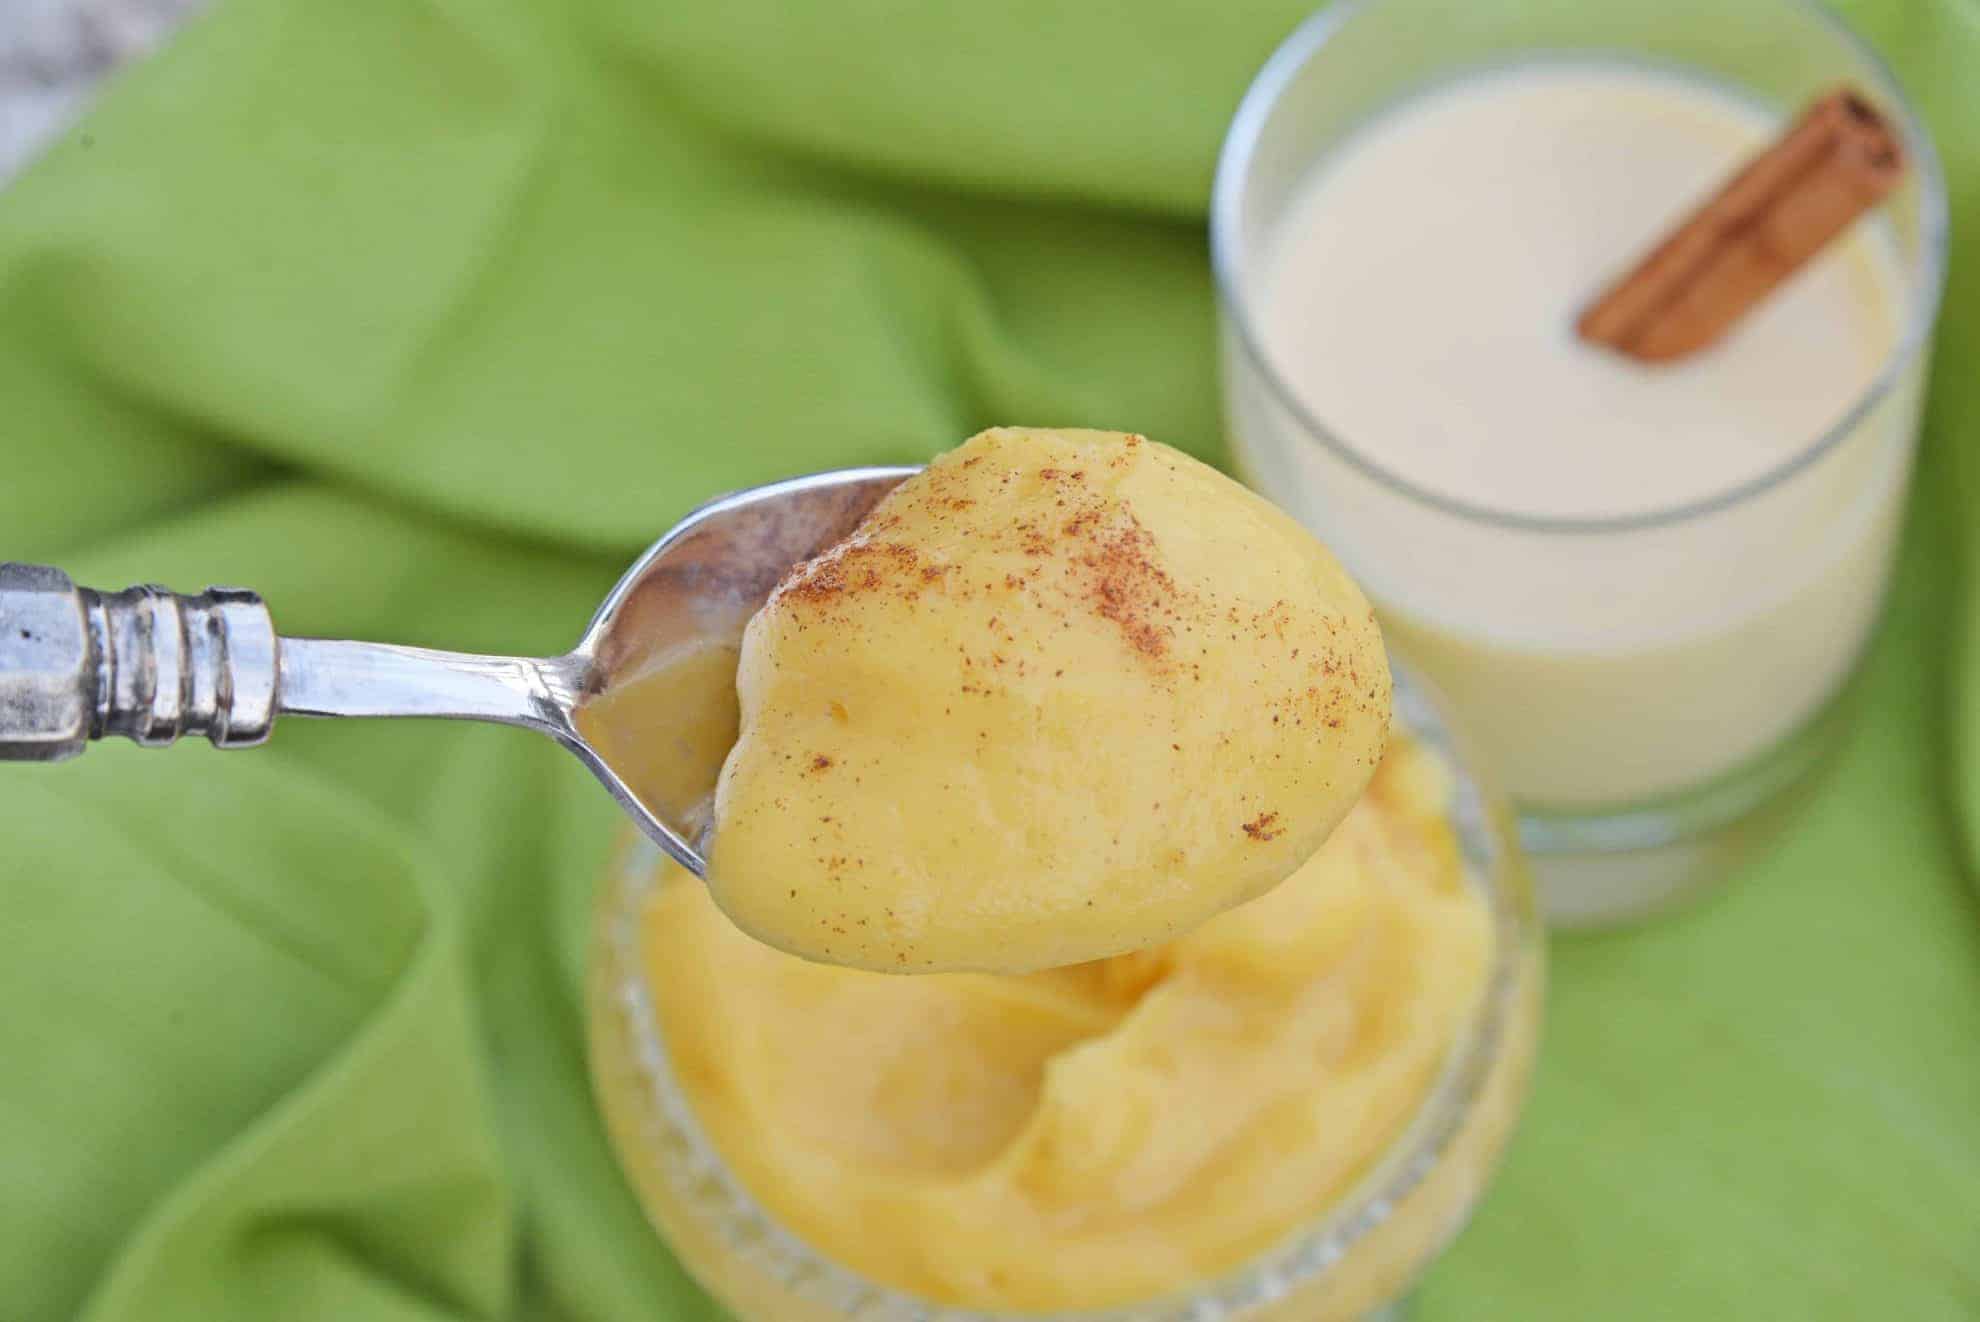 This 5-Minute Eggnog Pudding is one of the tastiest homemade pudding recipes you'll ever make, with instant pudding and a few festive ingredients! #puddingrecipes #eggnogpudding #homemadepudding www.savoryexperiments.com